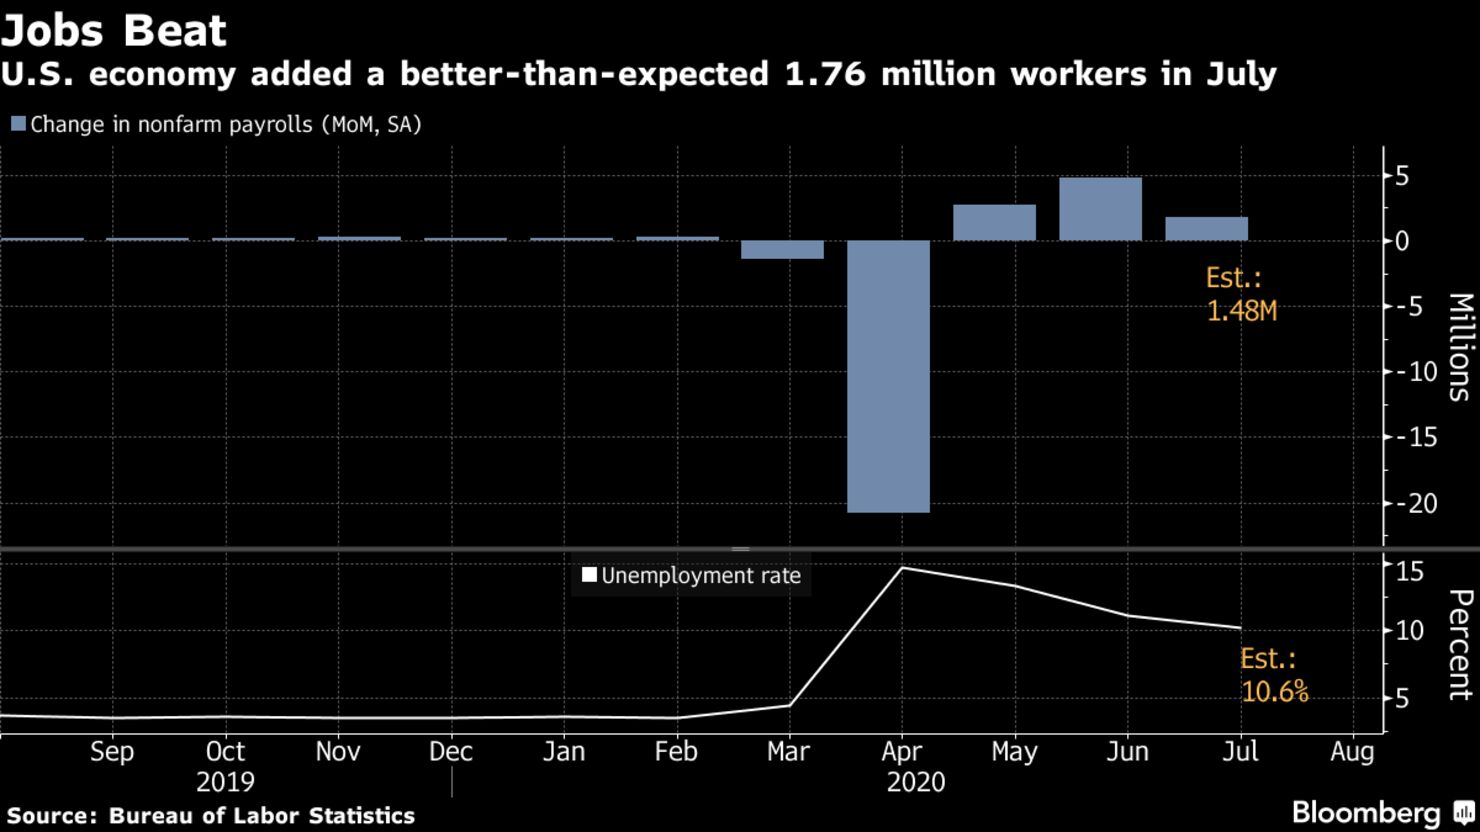 U.S. economy added a better-than-expected 1.76 million workers in July